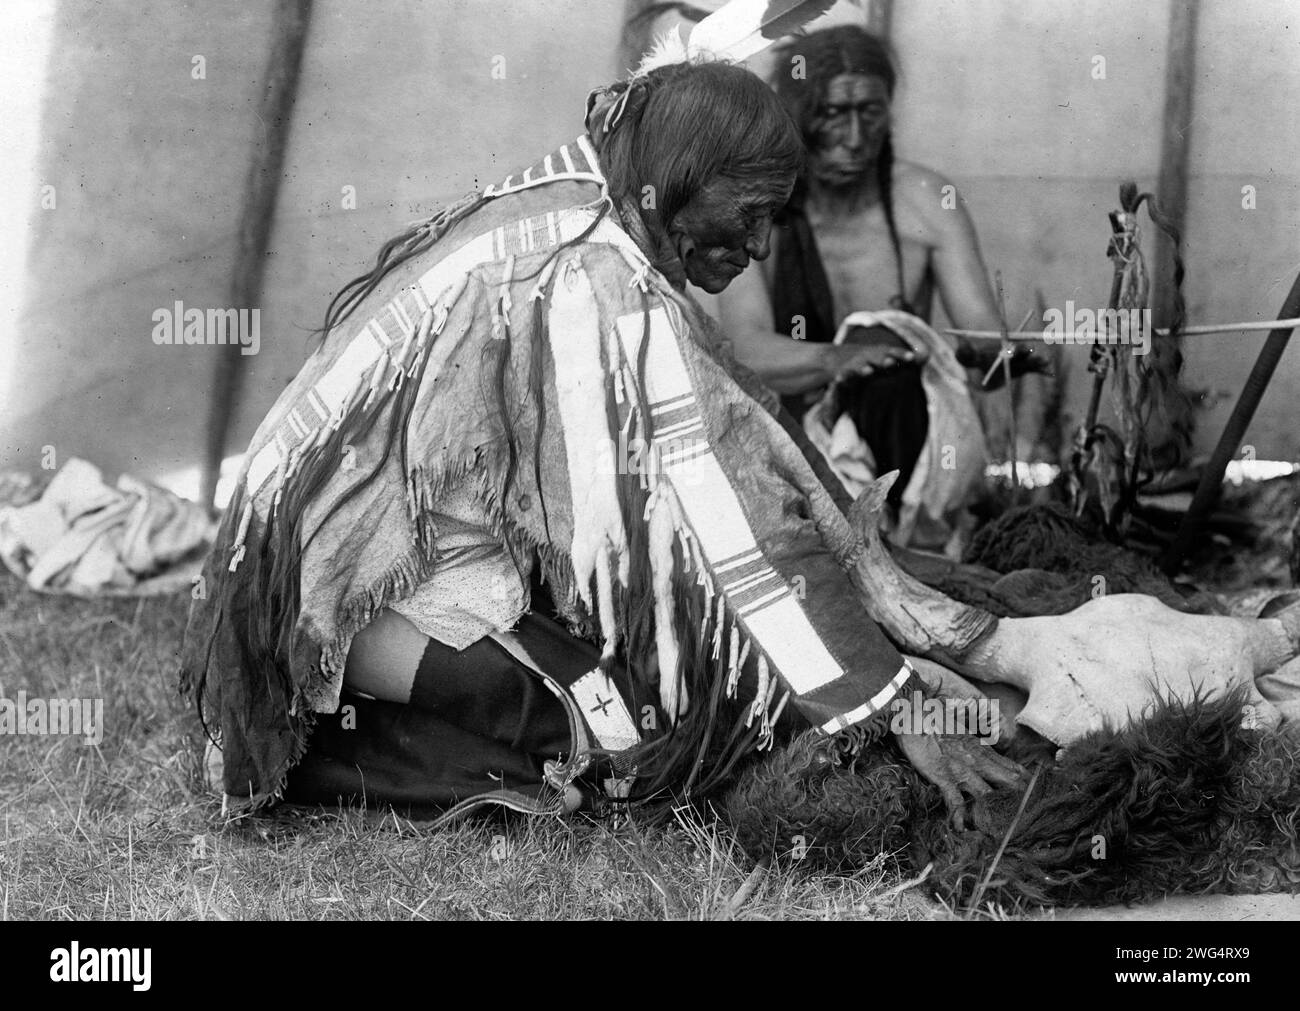 Hu Kalowa Pi-Removes the covering, c1907. Interior of tepee, man kneeling on ground remouving buffalo hide around skull on ground, another male behind altar warming hands by fire. Stock Photo